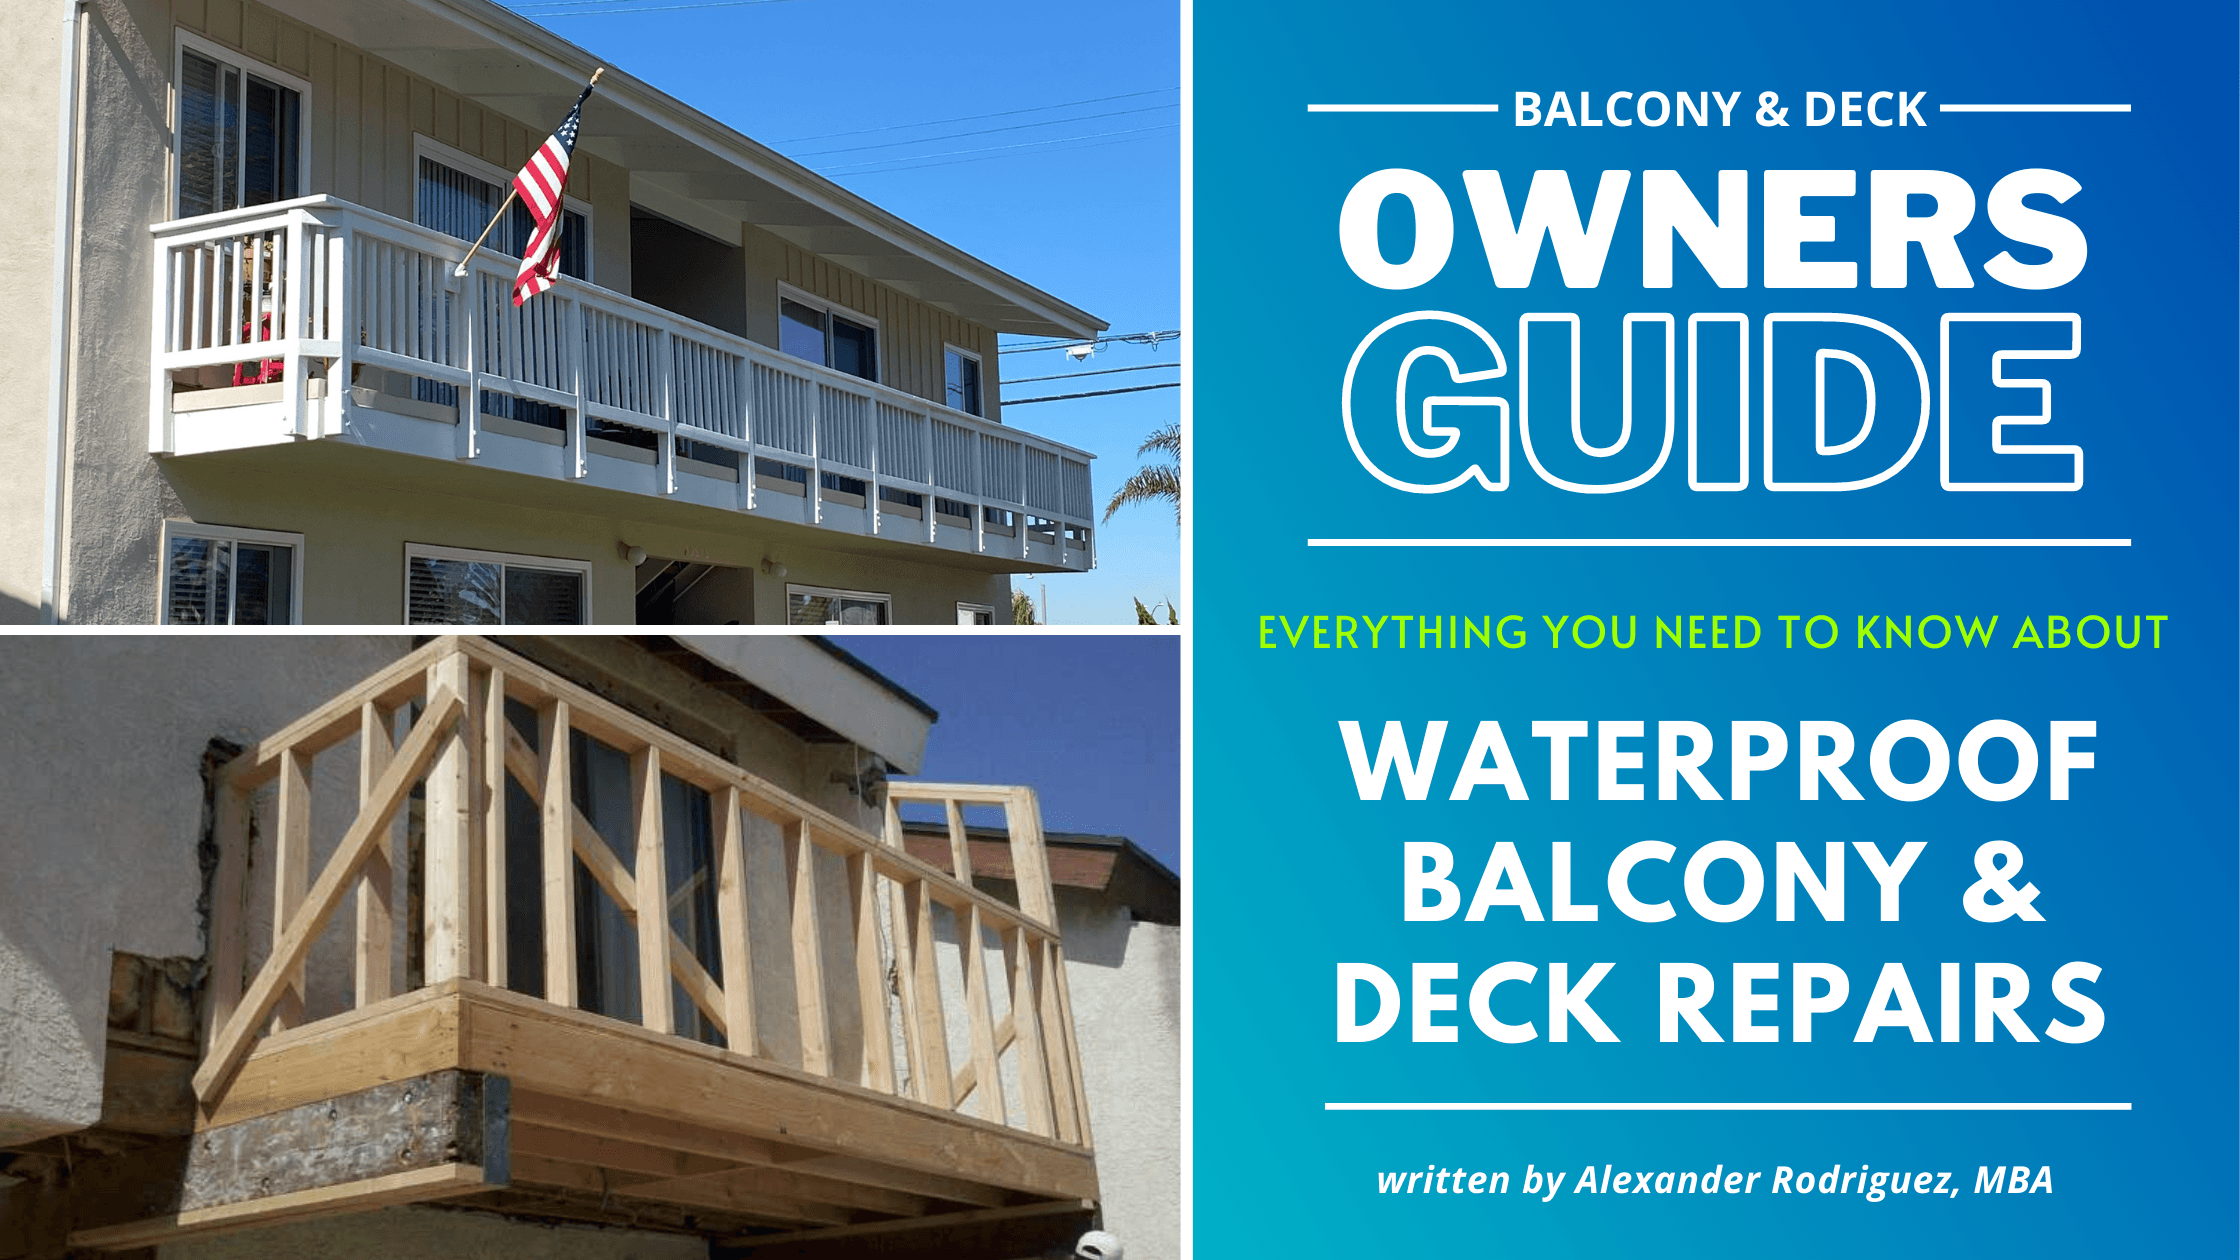 Everything You Need to Know About Waterproof Balcony & Deck Repairs